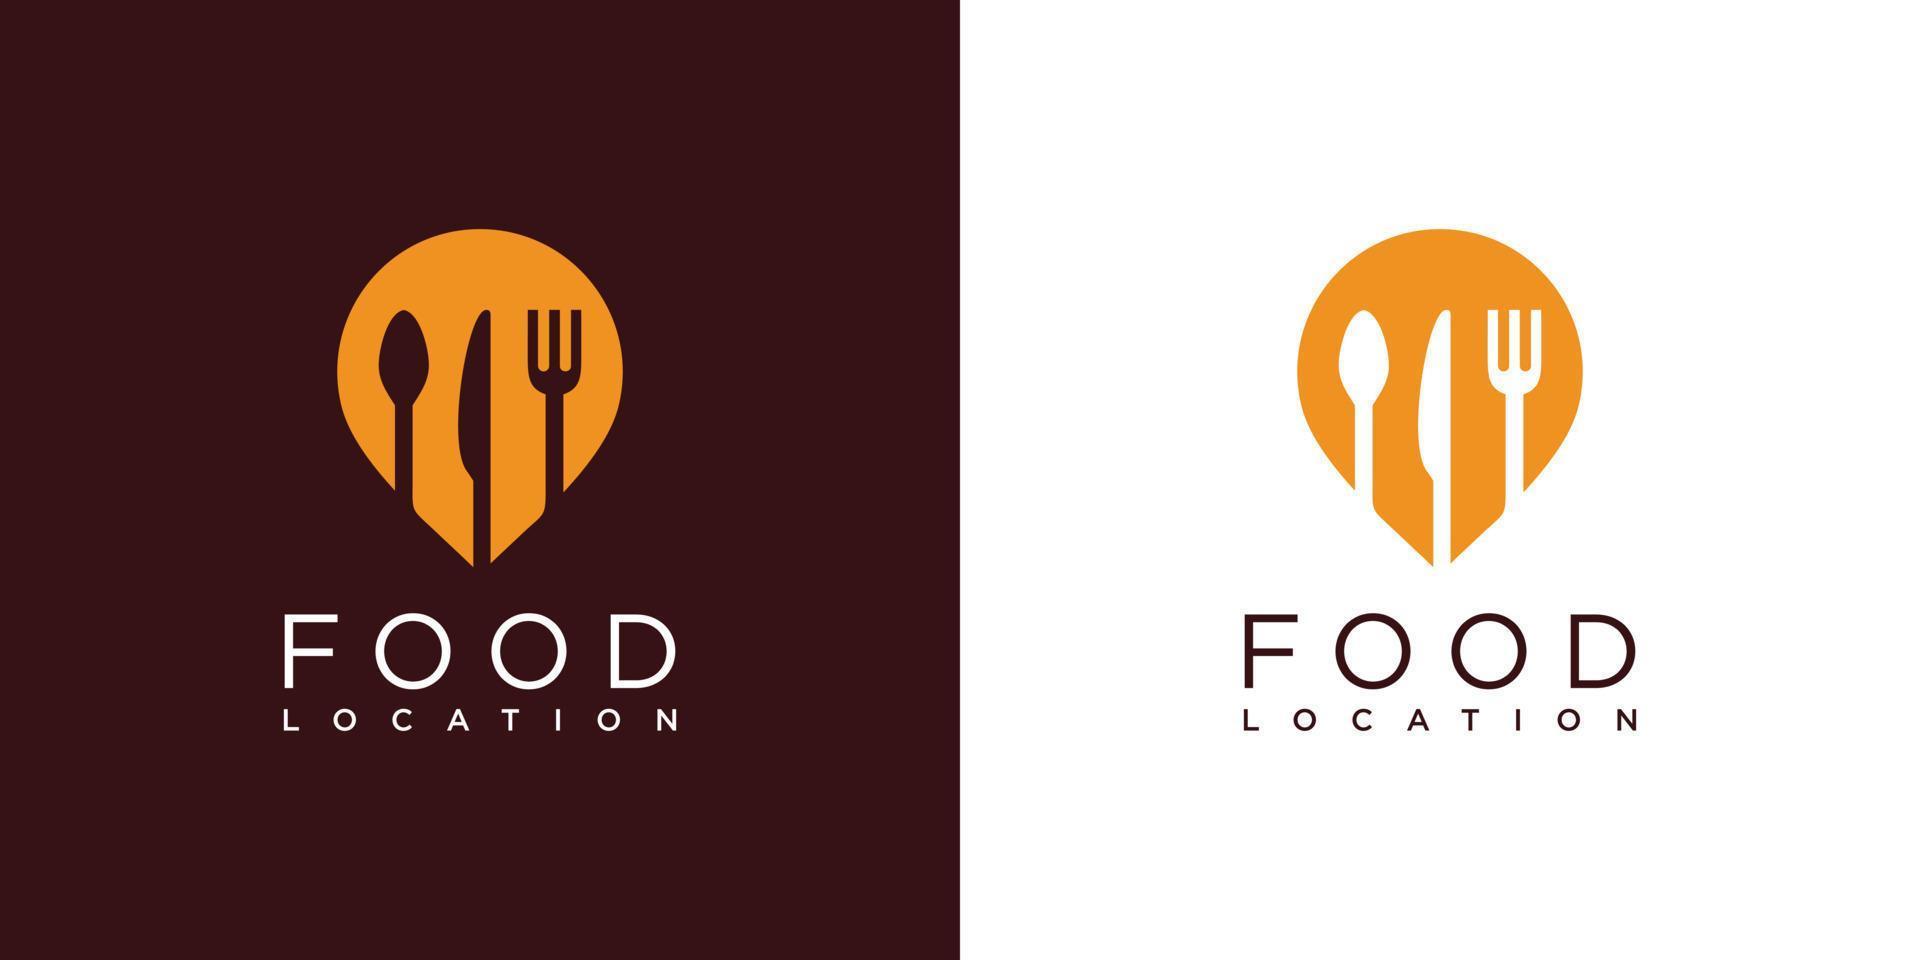 Food point logo design with creative pin location concept Premium Vector